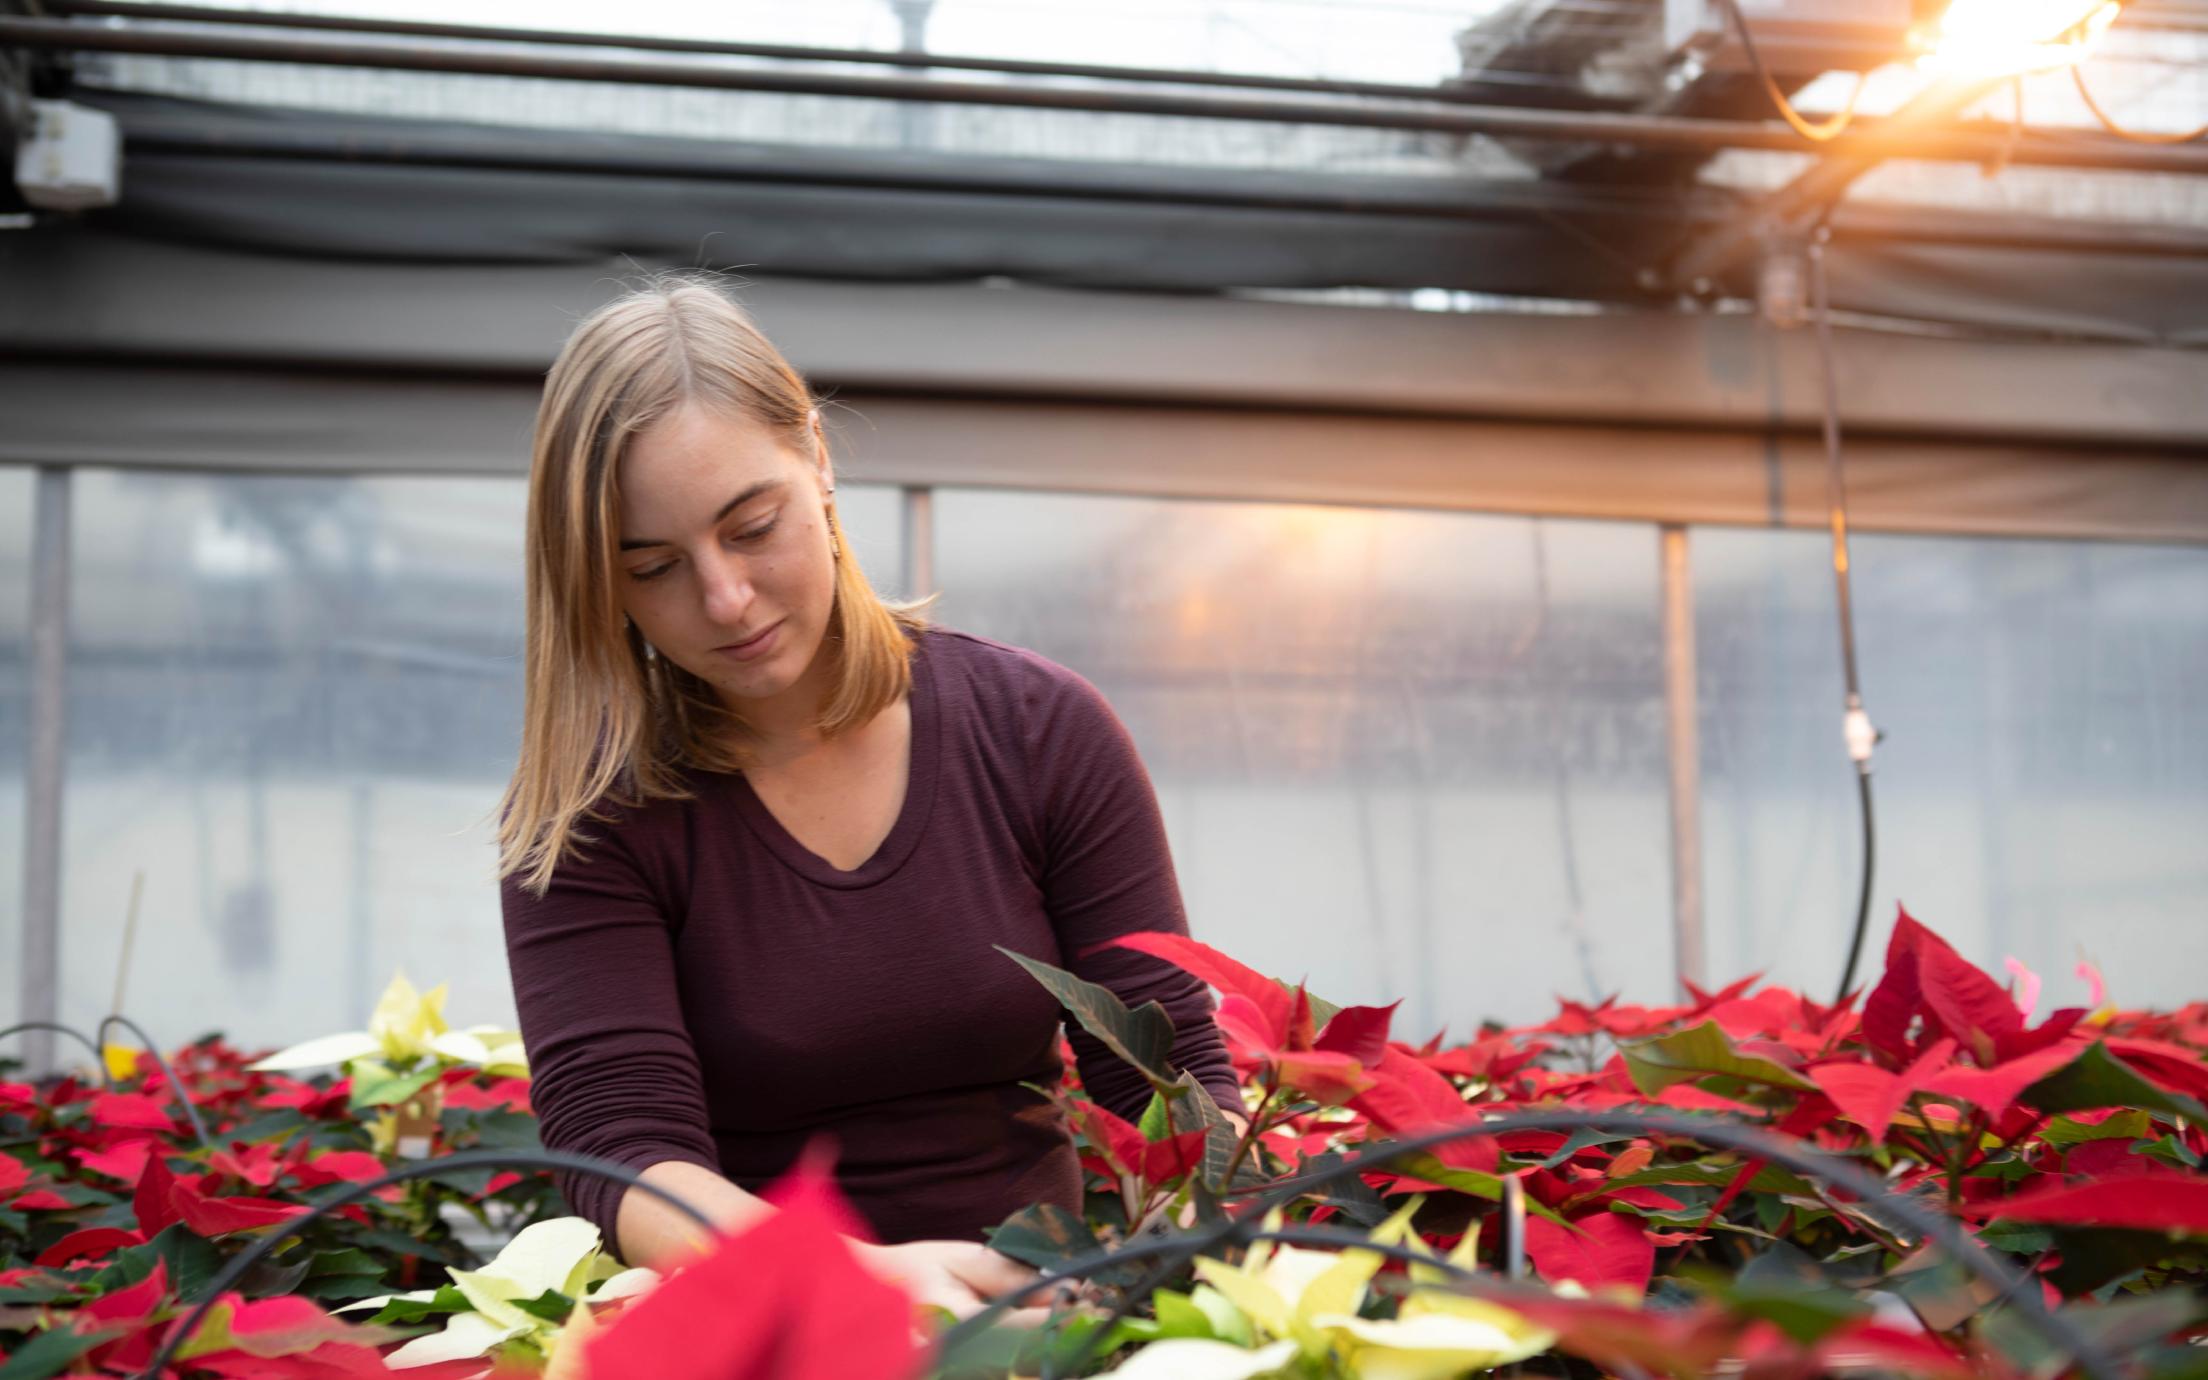 Horticulture student tending to poinsettias in a greenhouse.